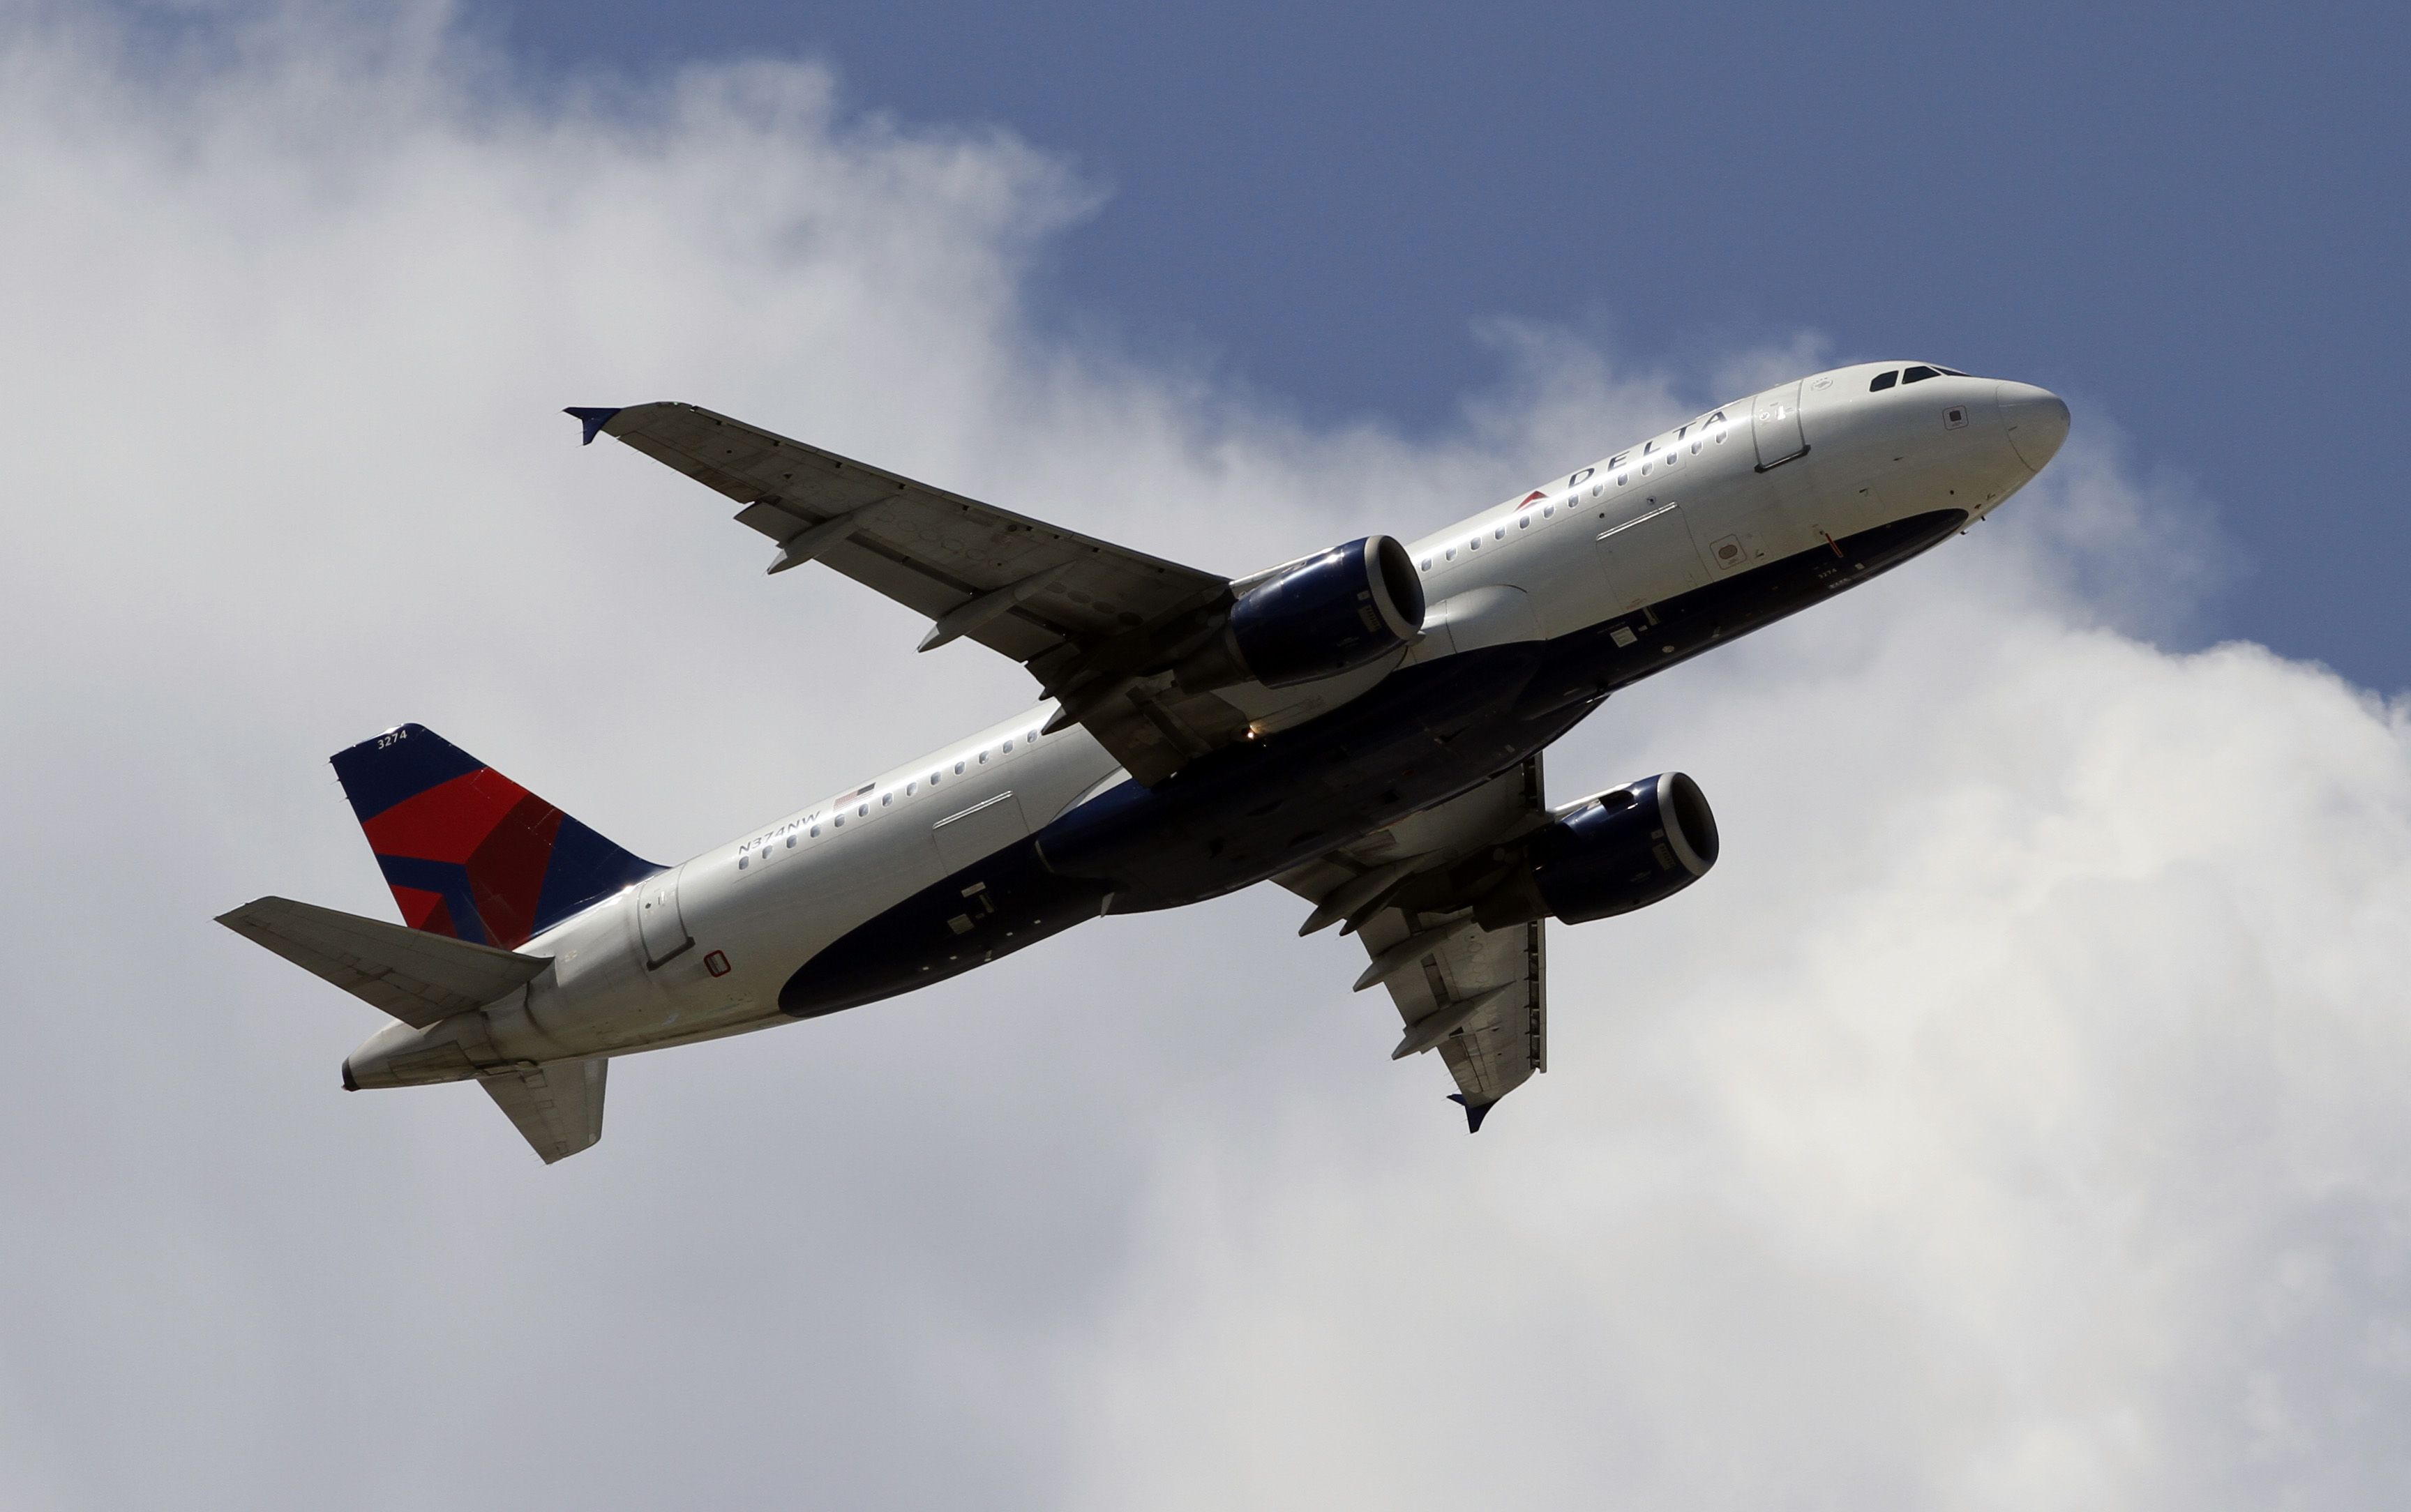 A Delta Air Lines aircraft takes off from Miami International Airport in Miami.